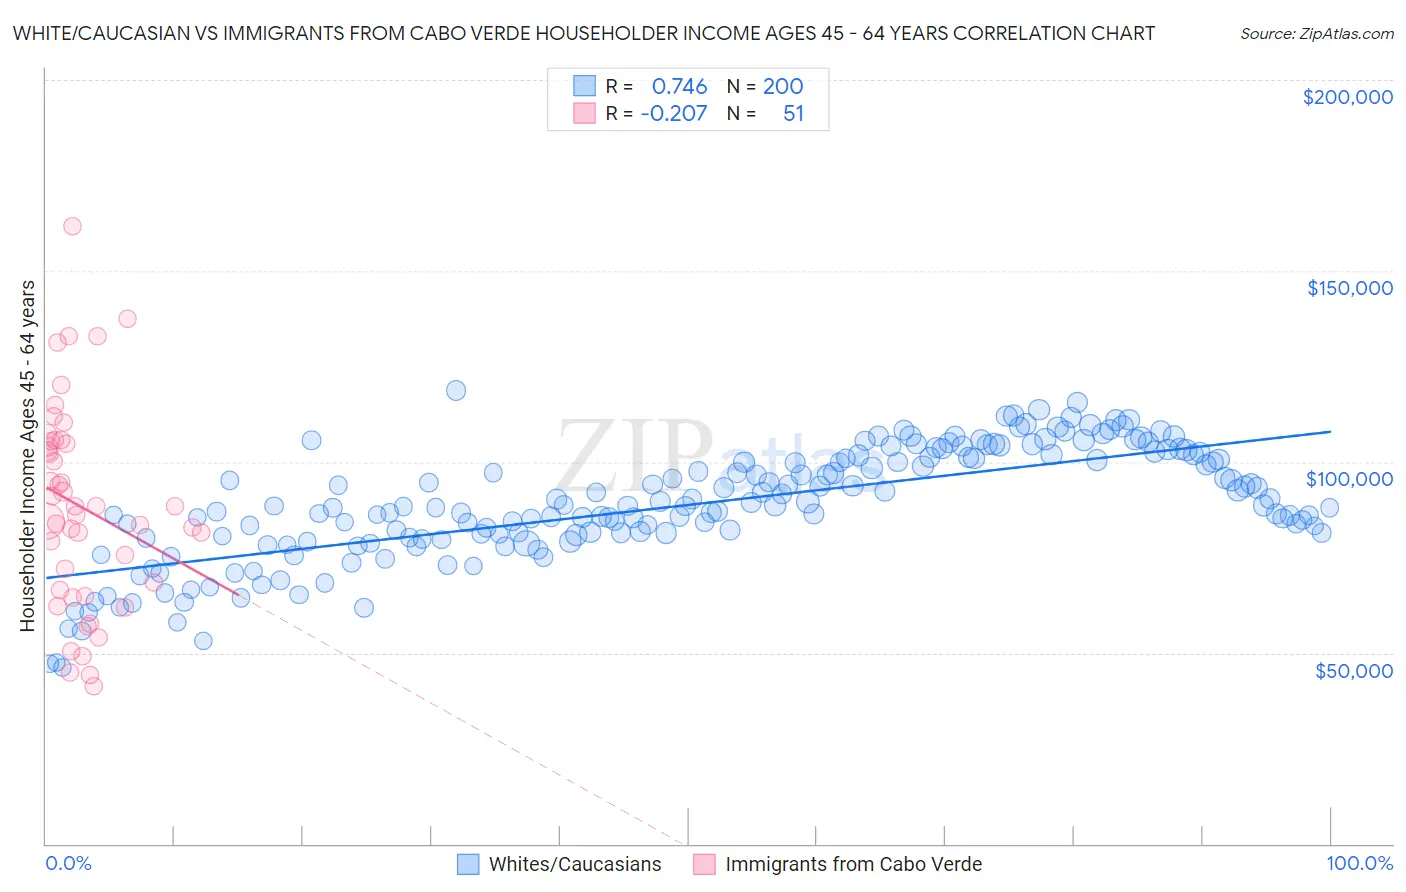 White/Caucasian vs Immigrants from Cabo Verde Householder Income Ages 45 - 64 years